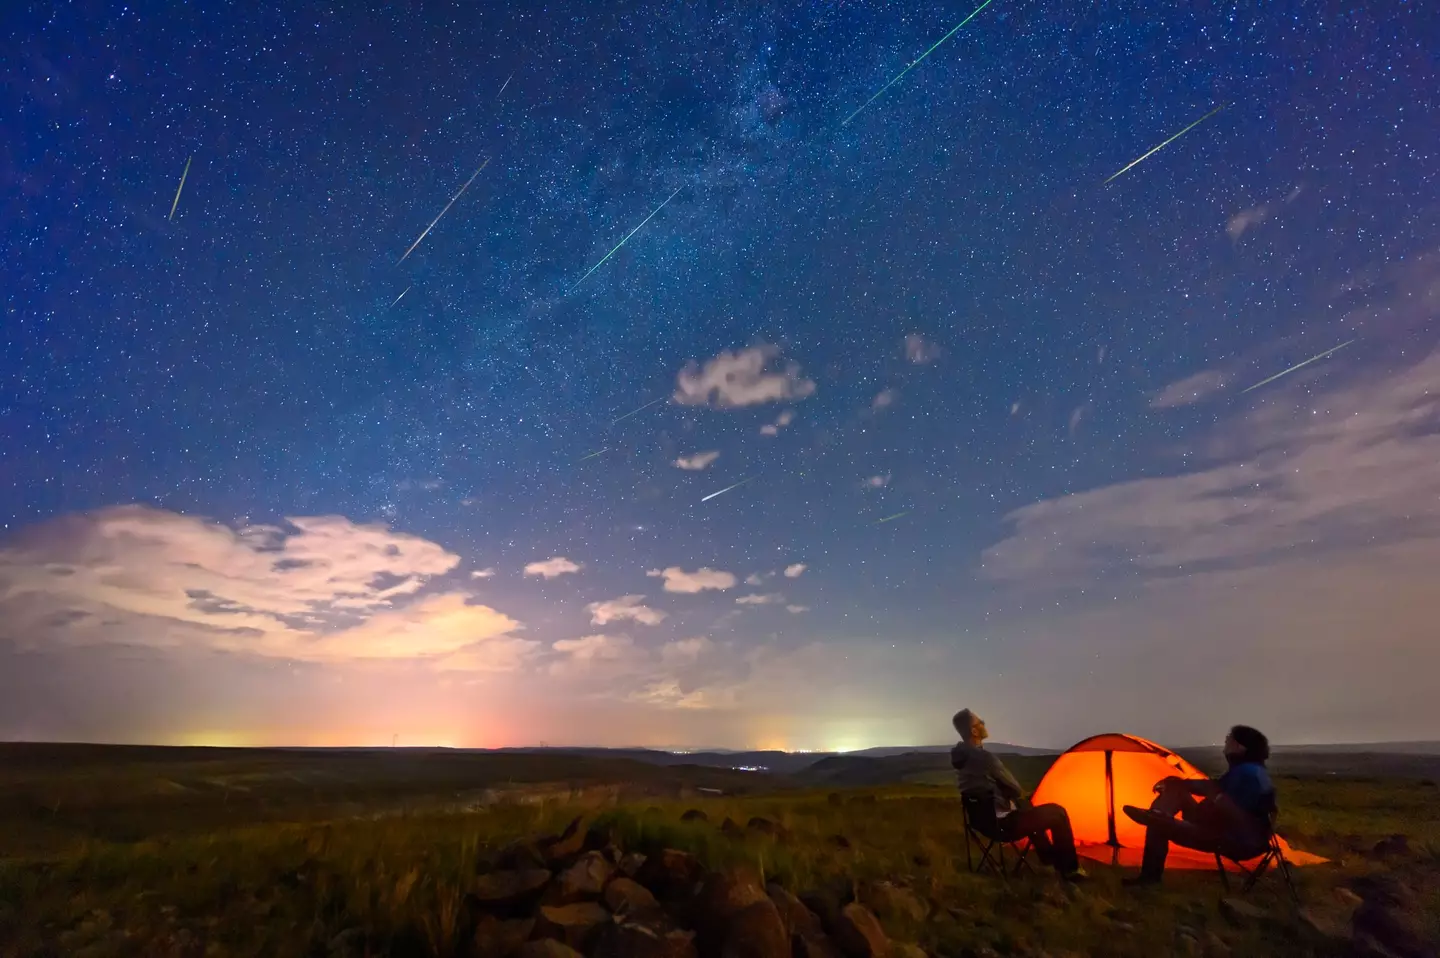 This year's Perseid meteor shower will peak on 12-13 August.